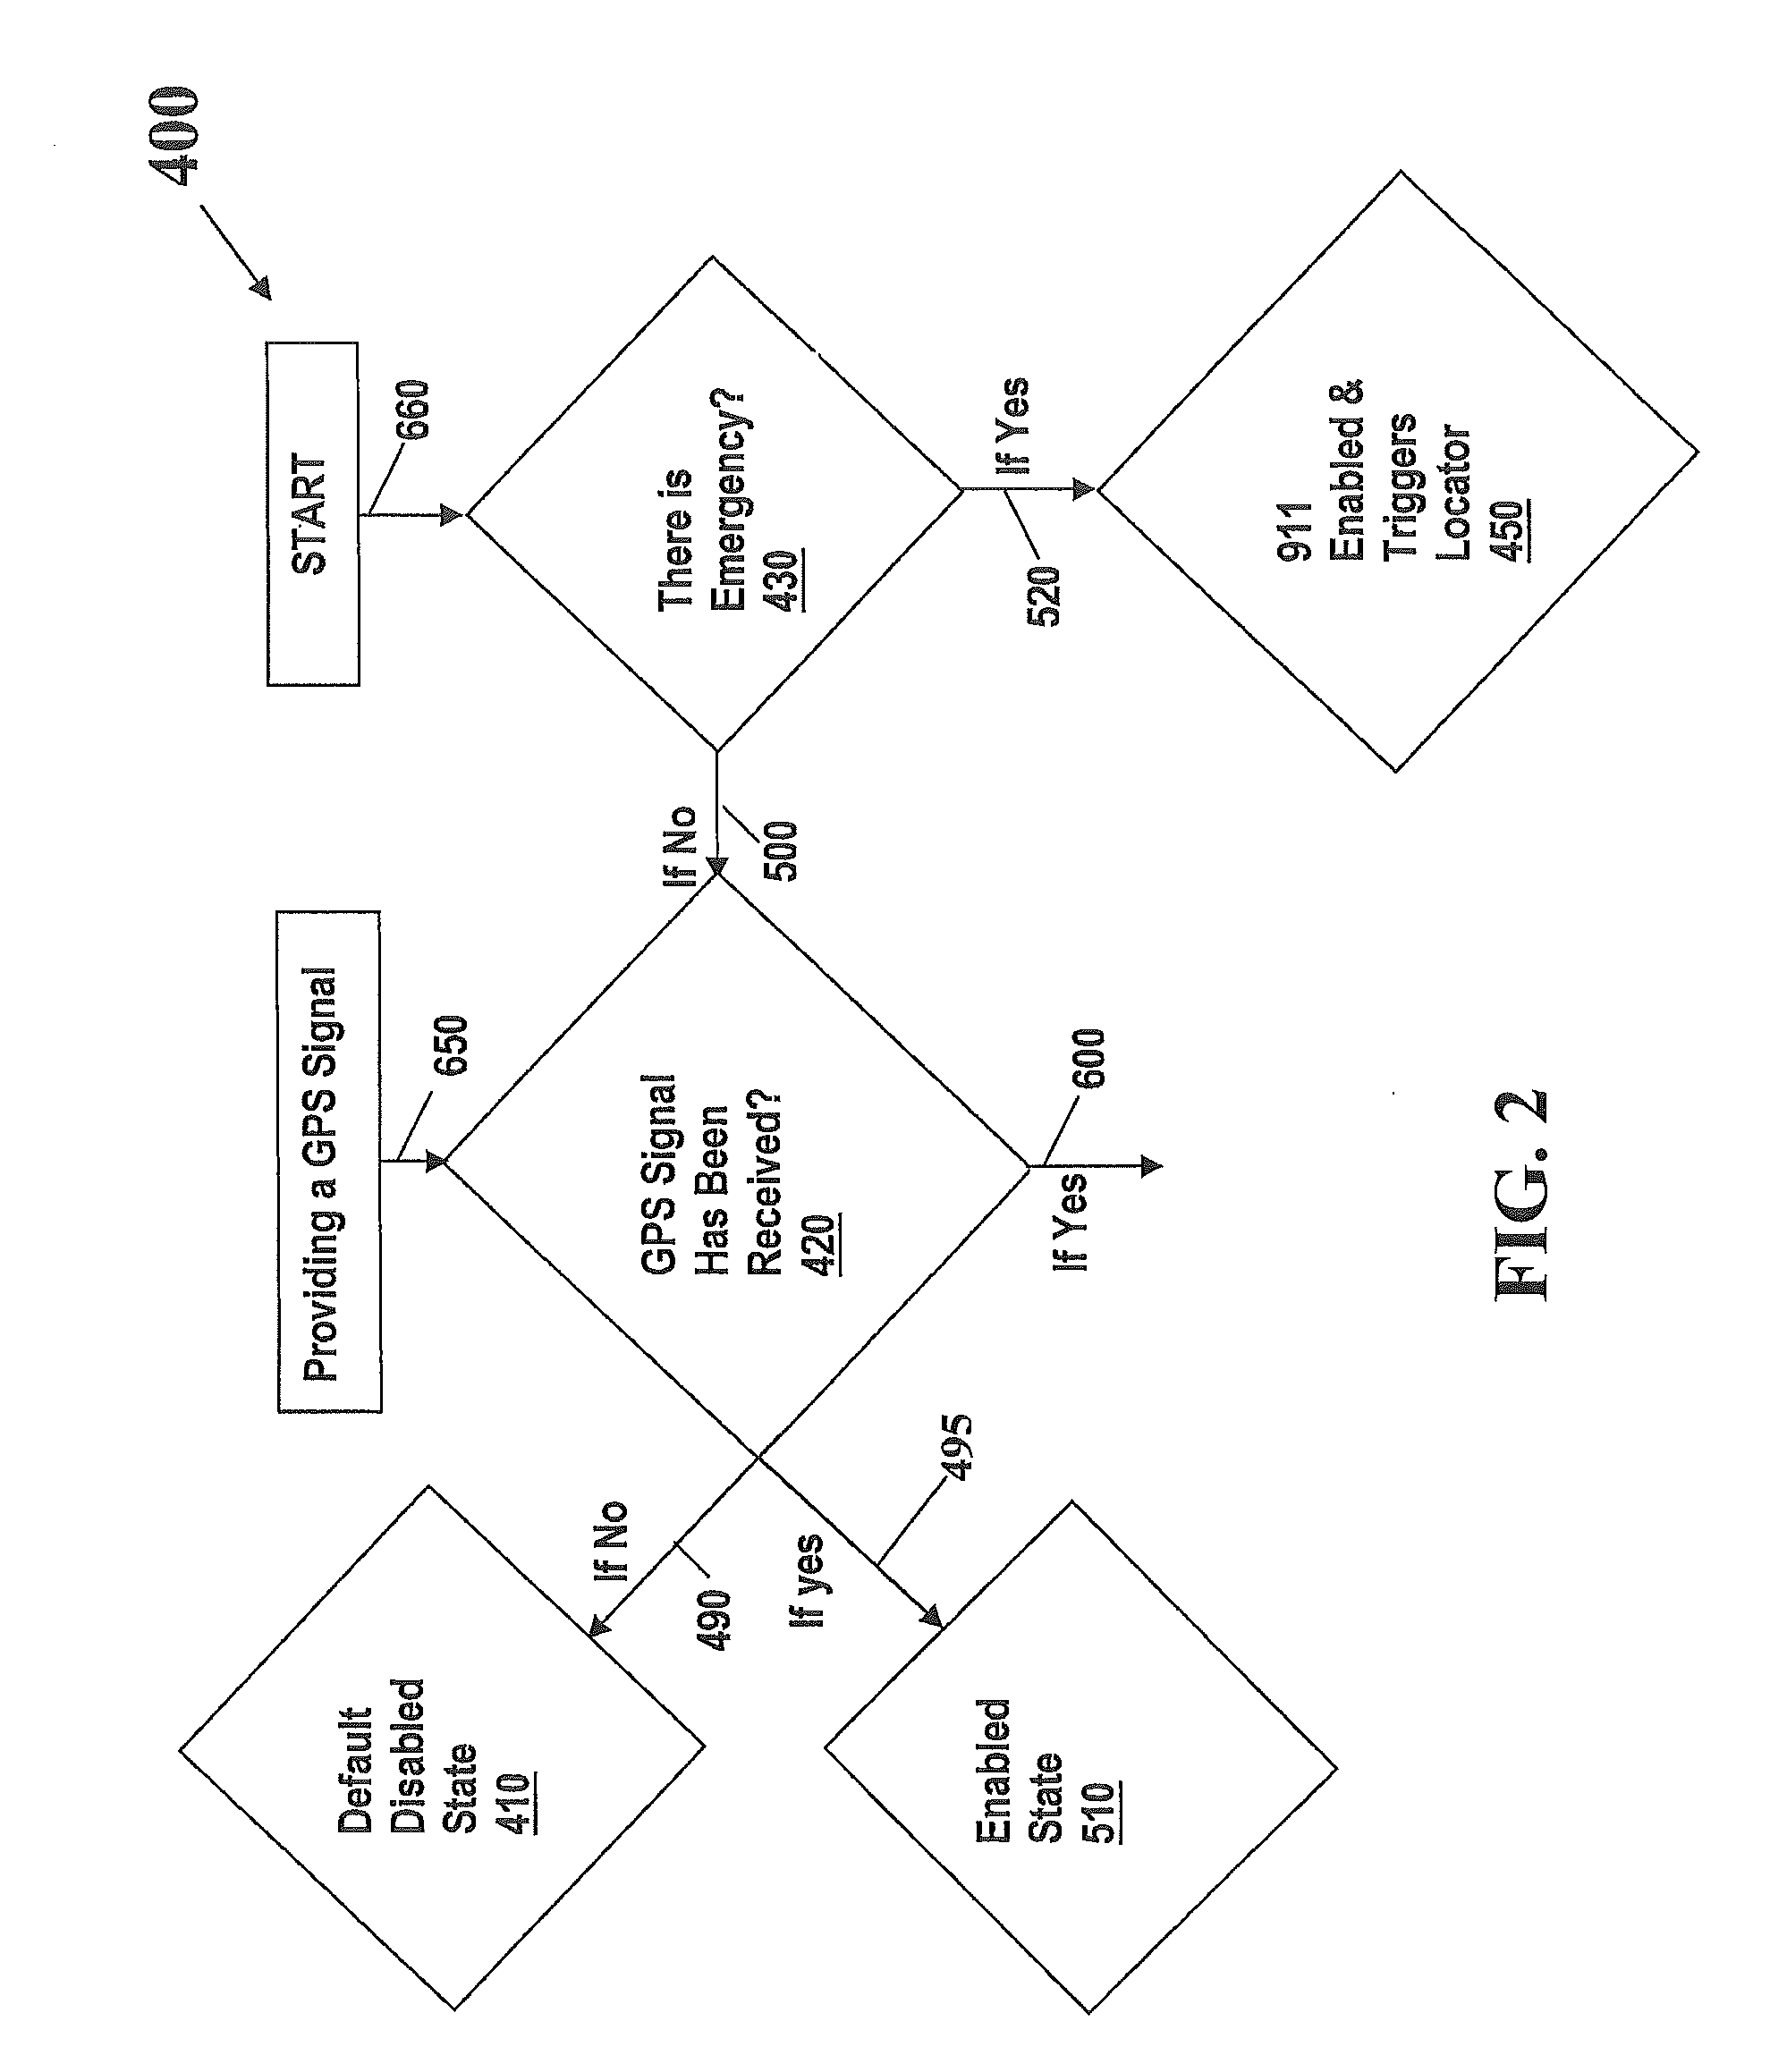 Apparatus for and system for enabling a mobile communicator